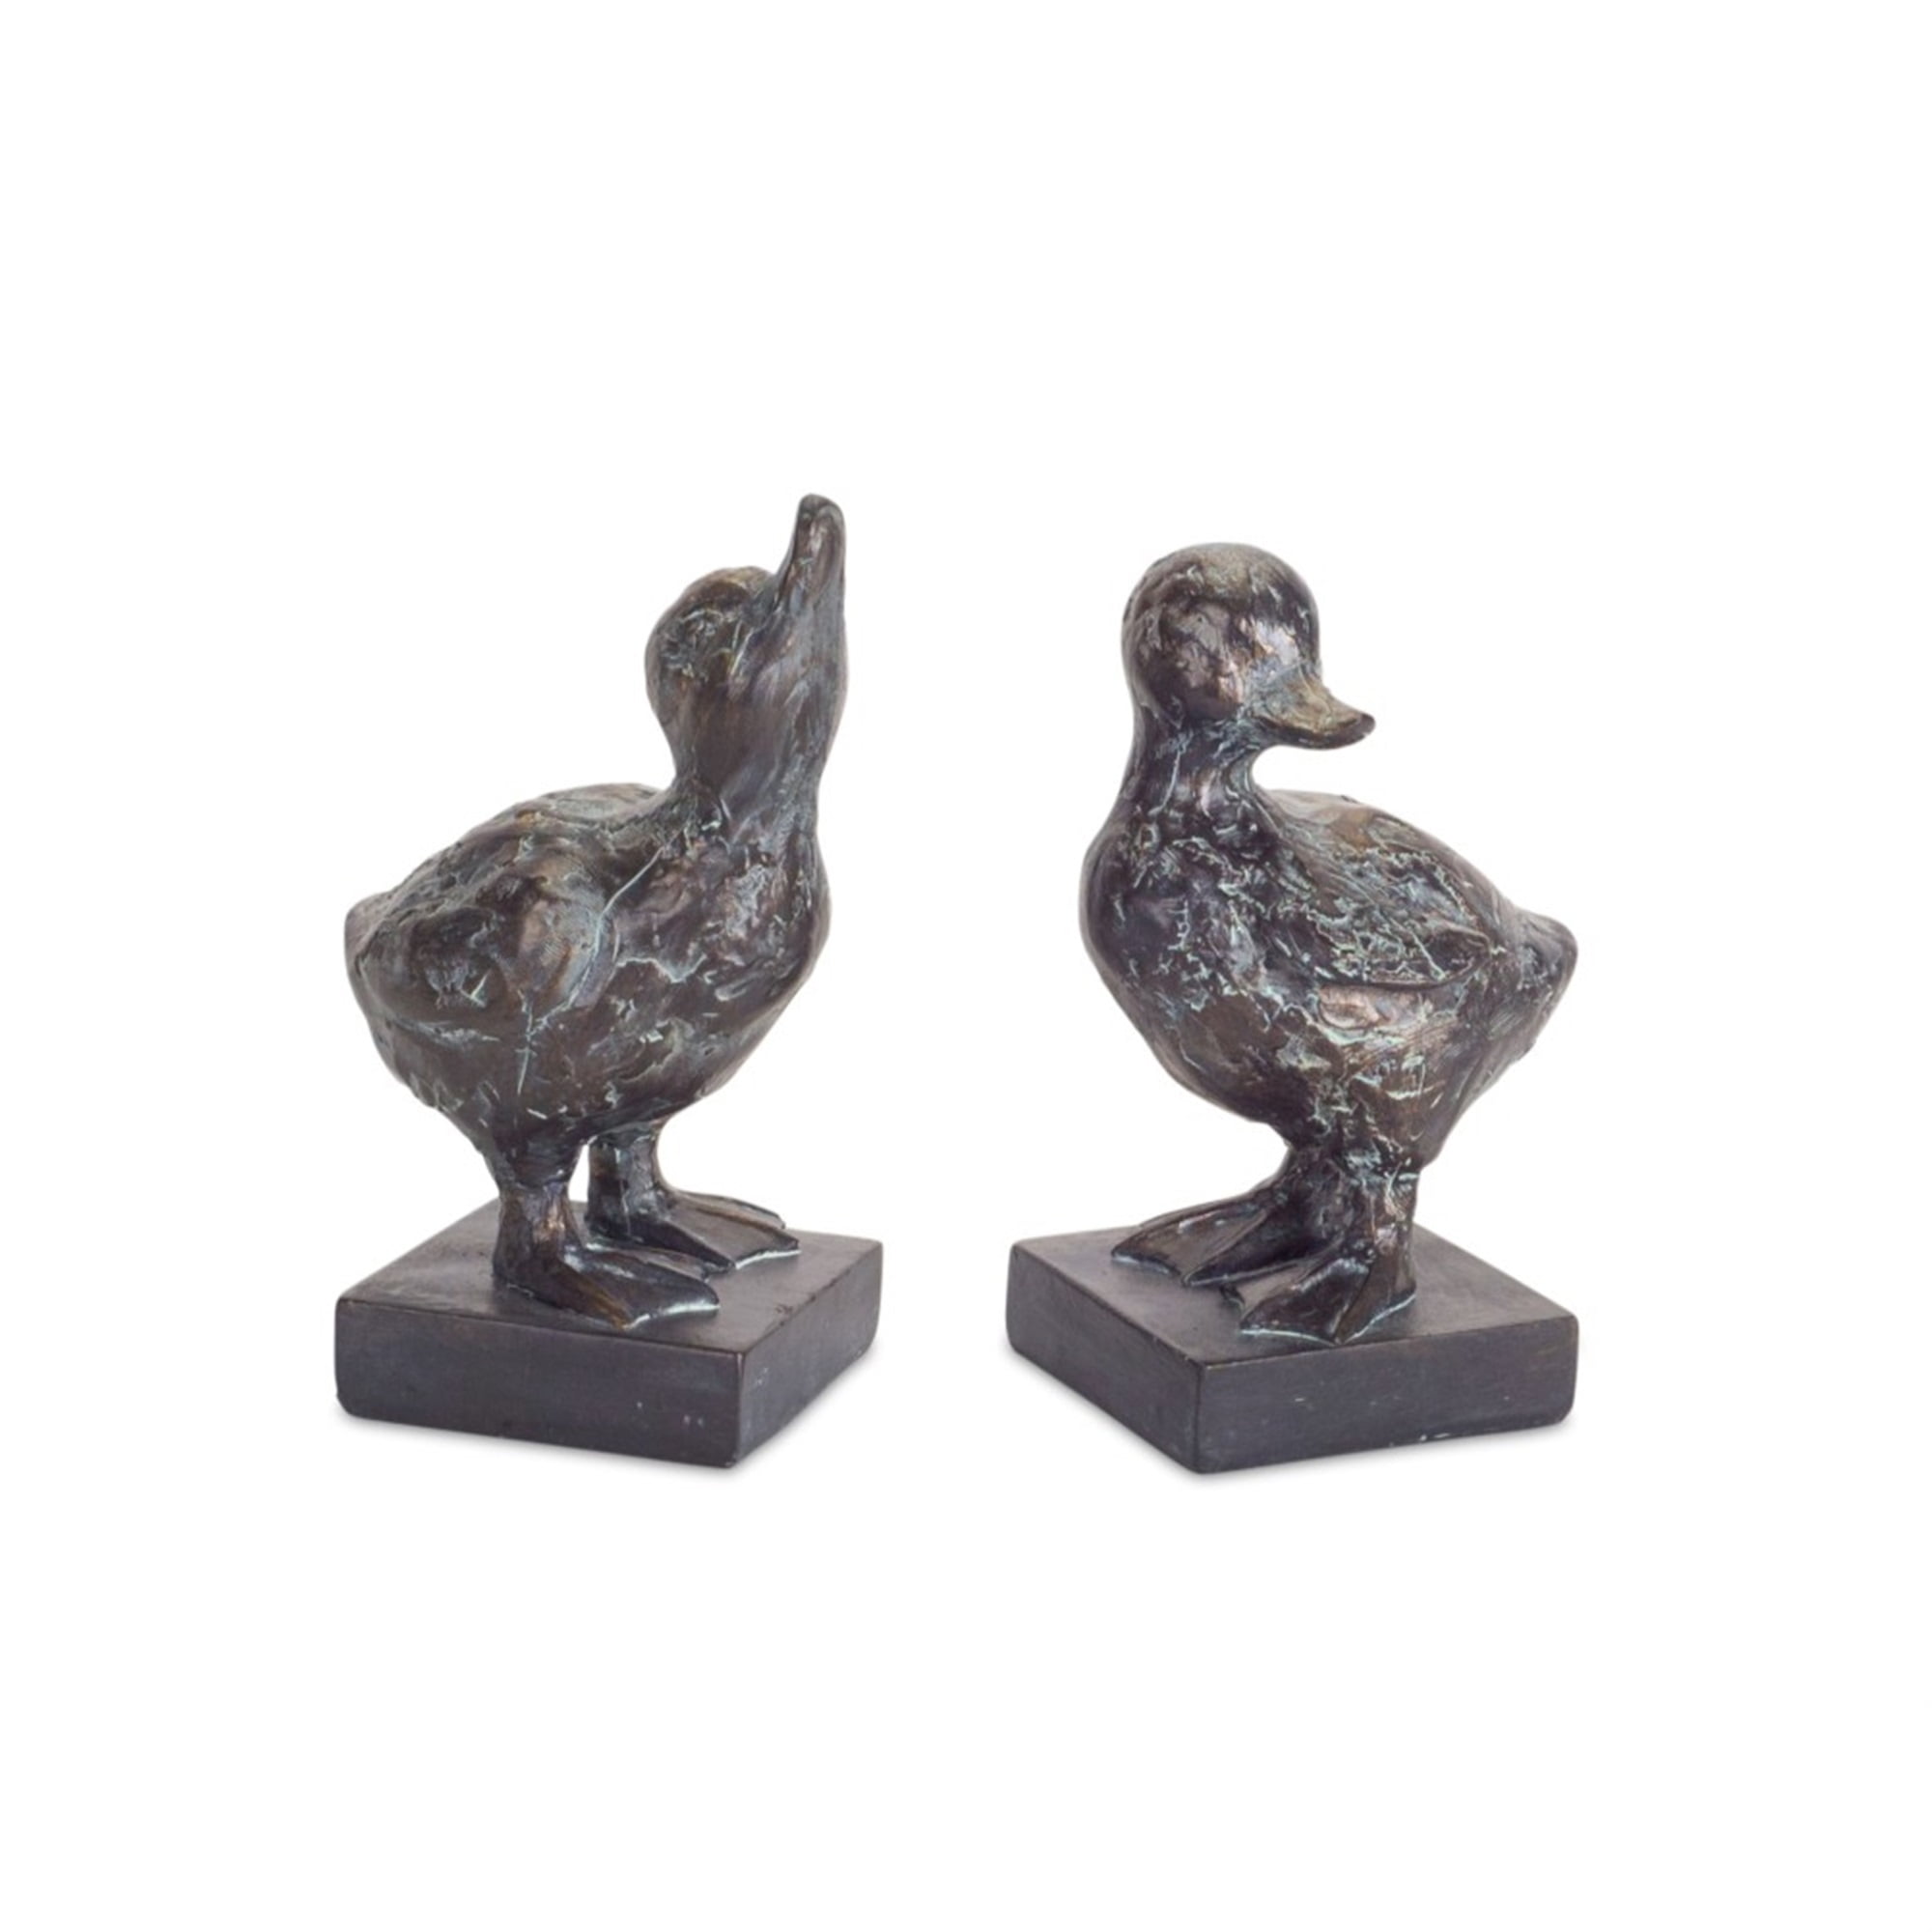 Duck (Set of 6) 4.75"H, 5"H Resin